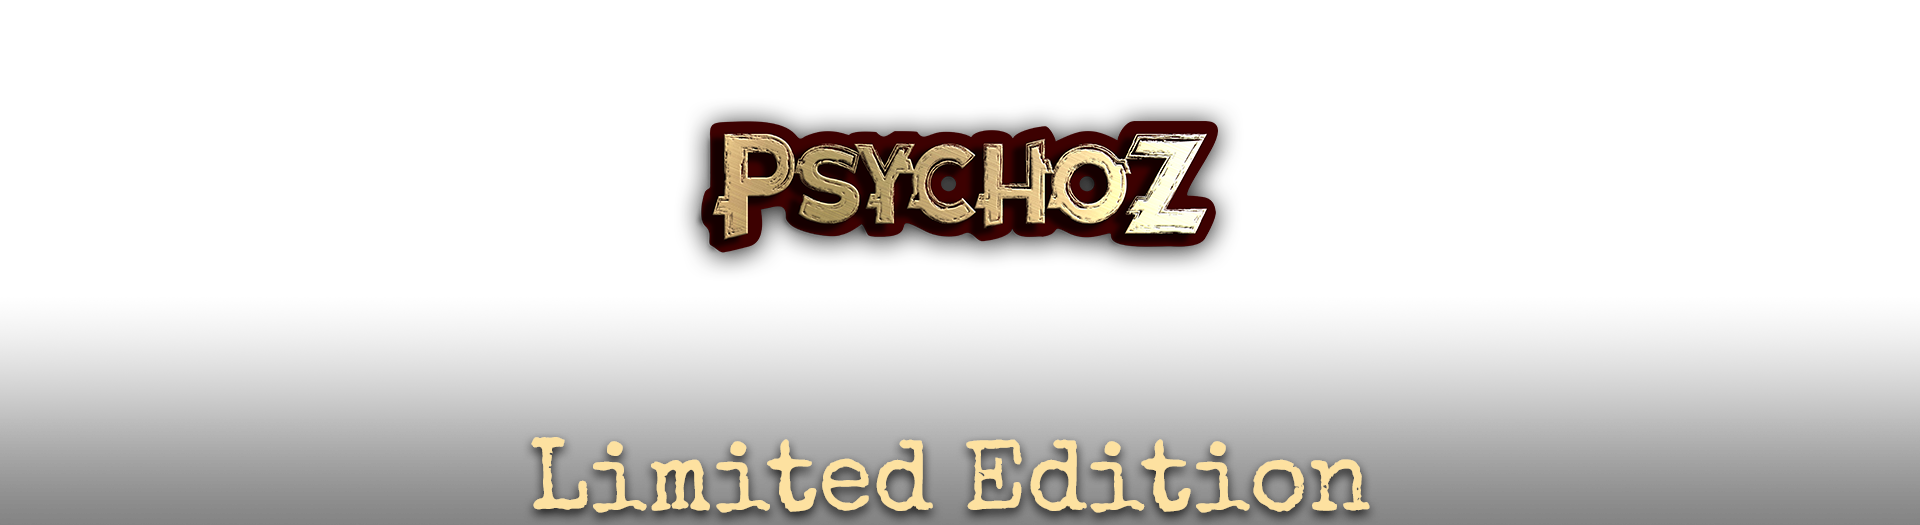 Psychoz Limited Edition Page